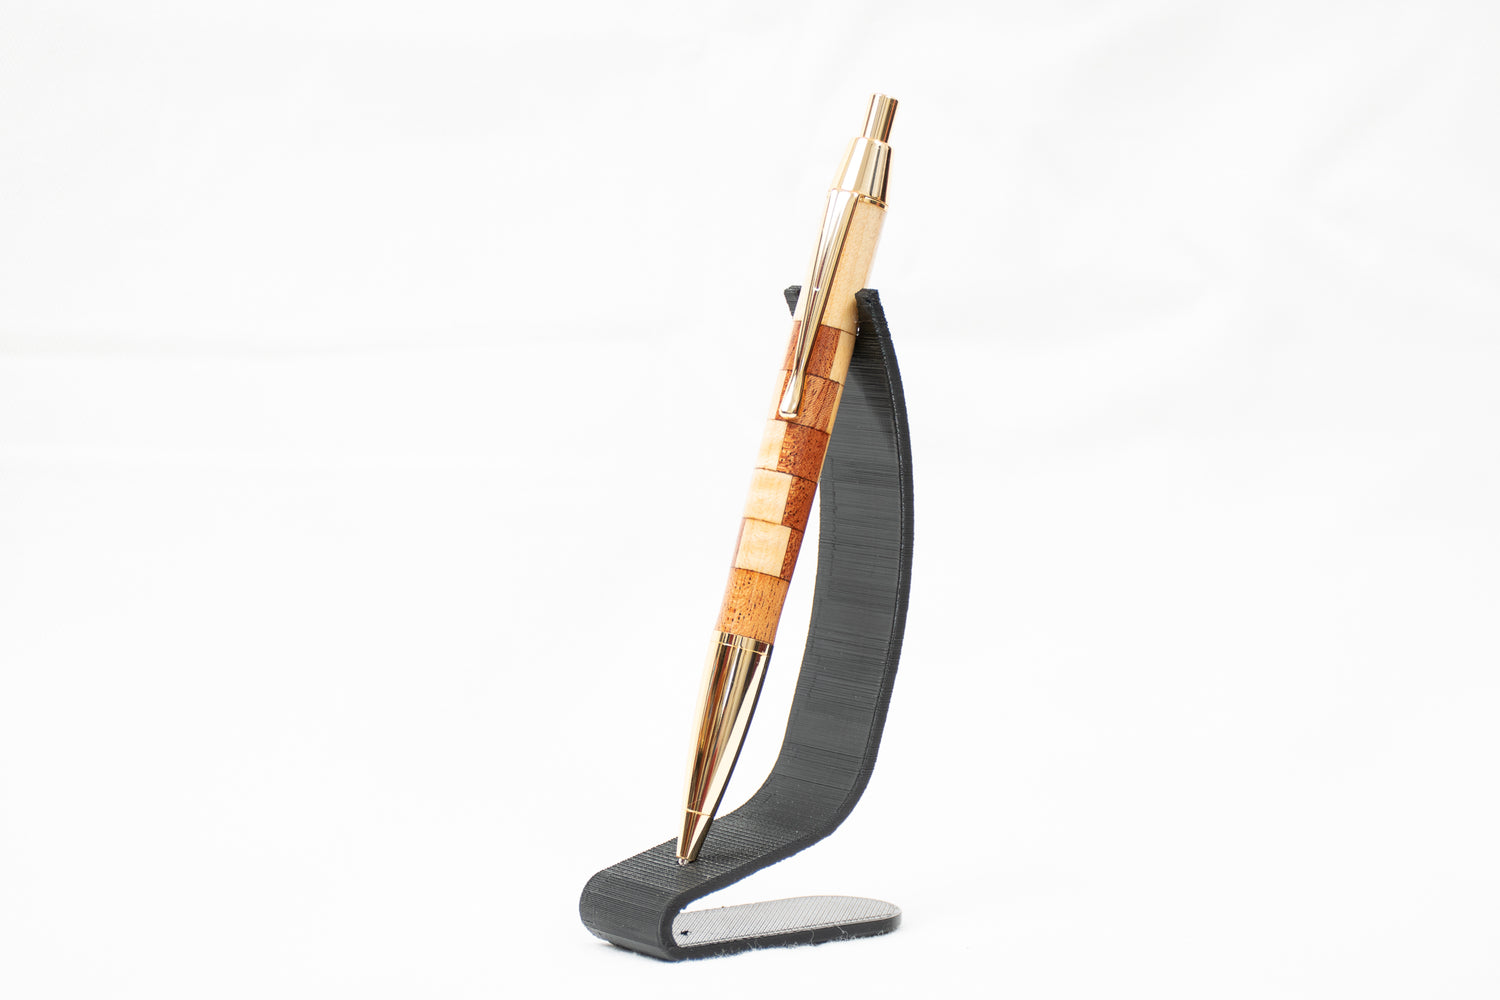 A handmade maple and african mahogany wood pen with gold plating on a black stand